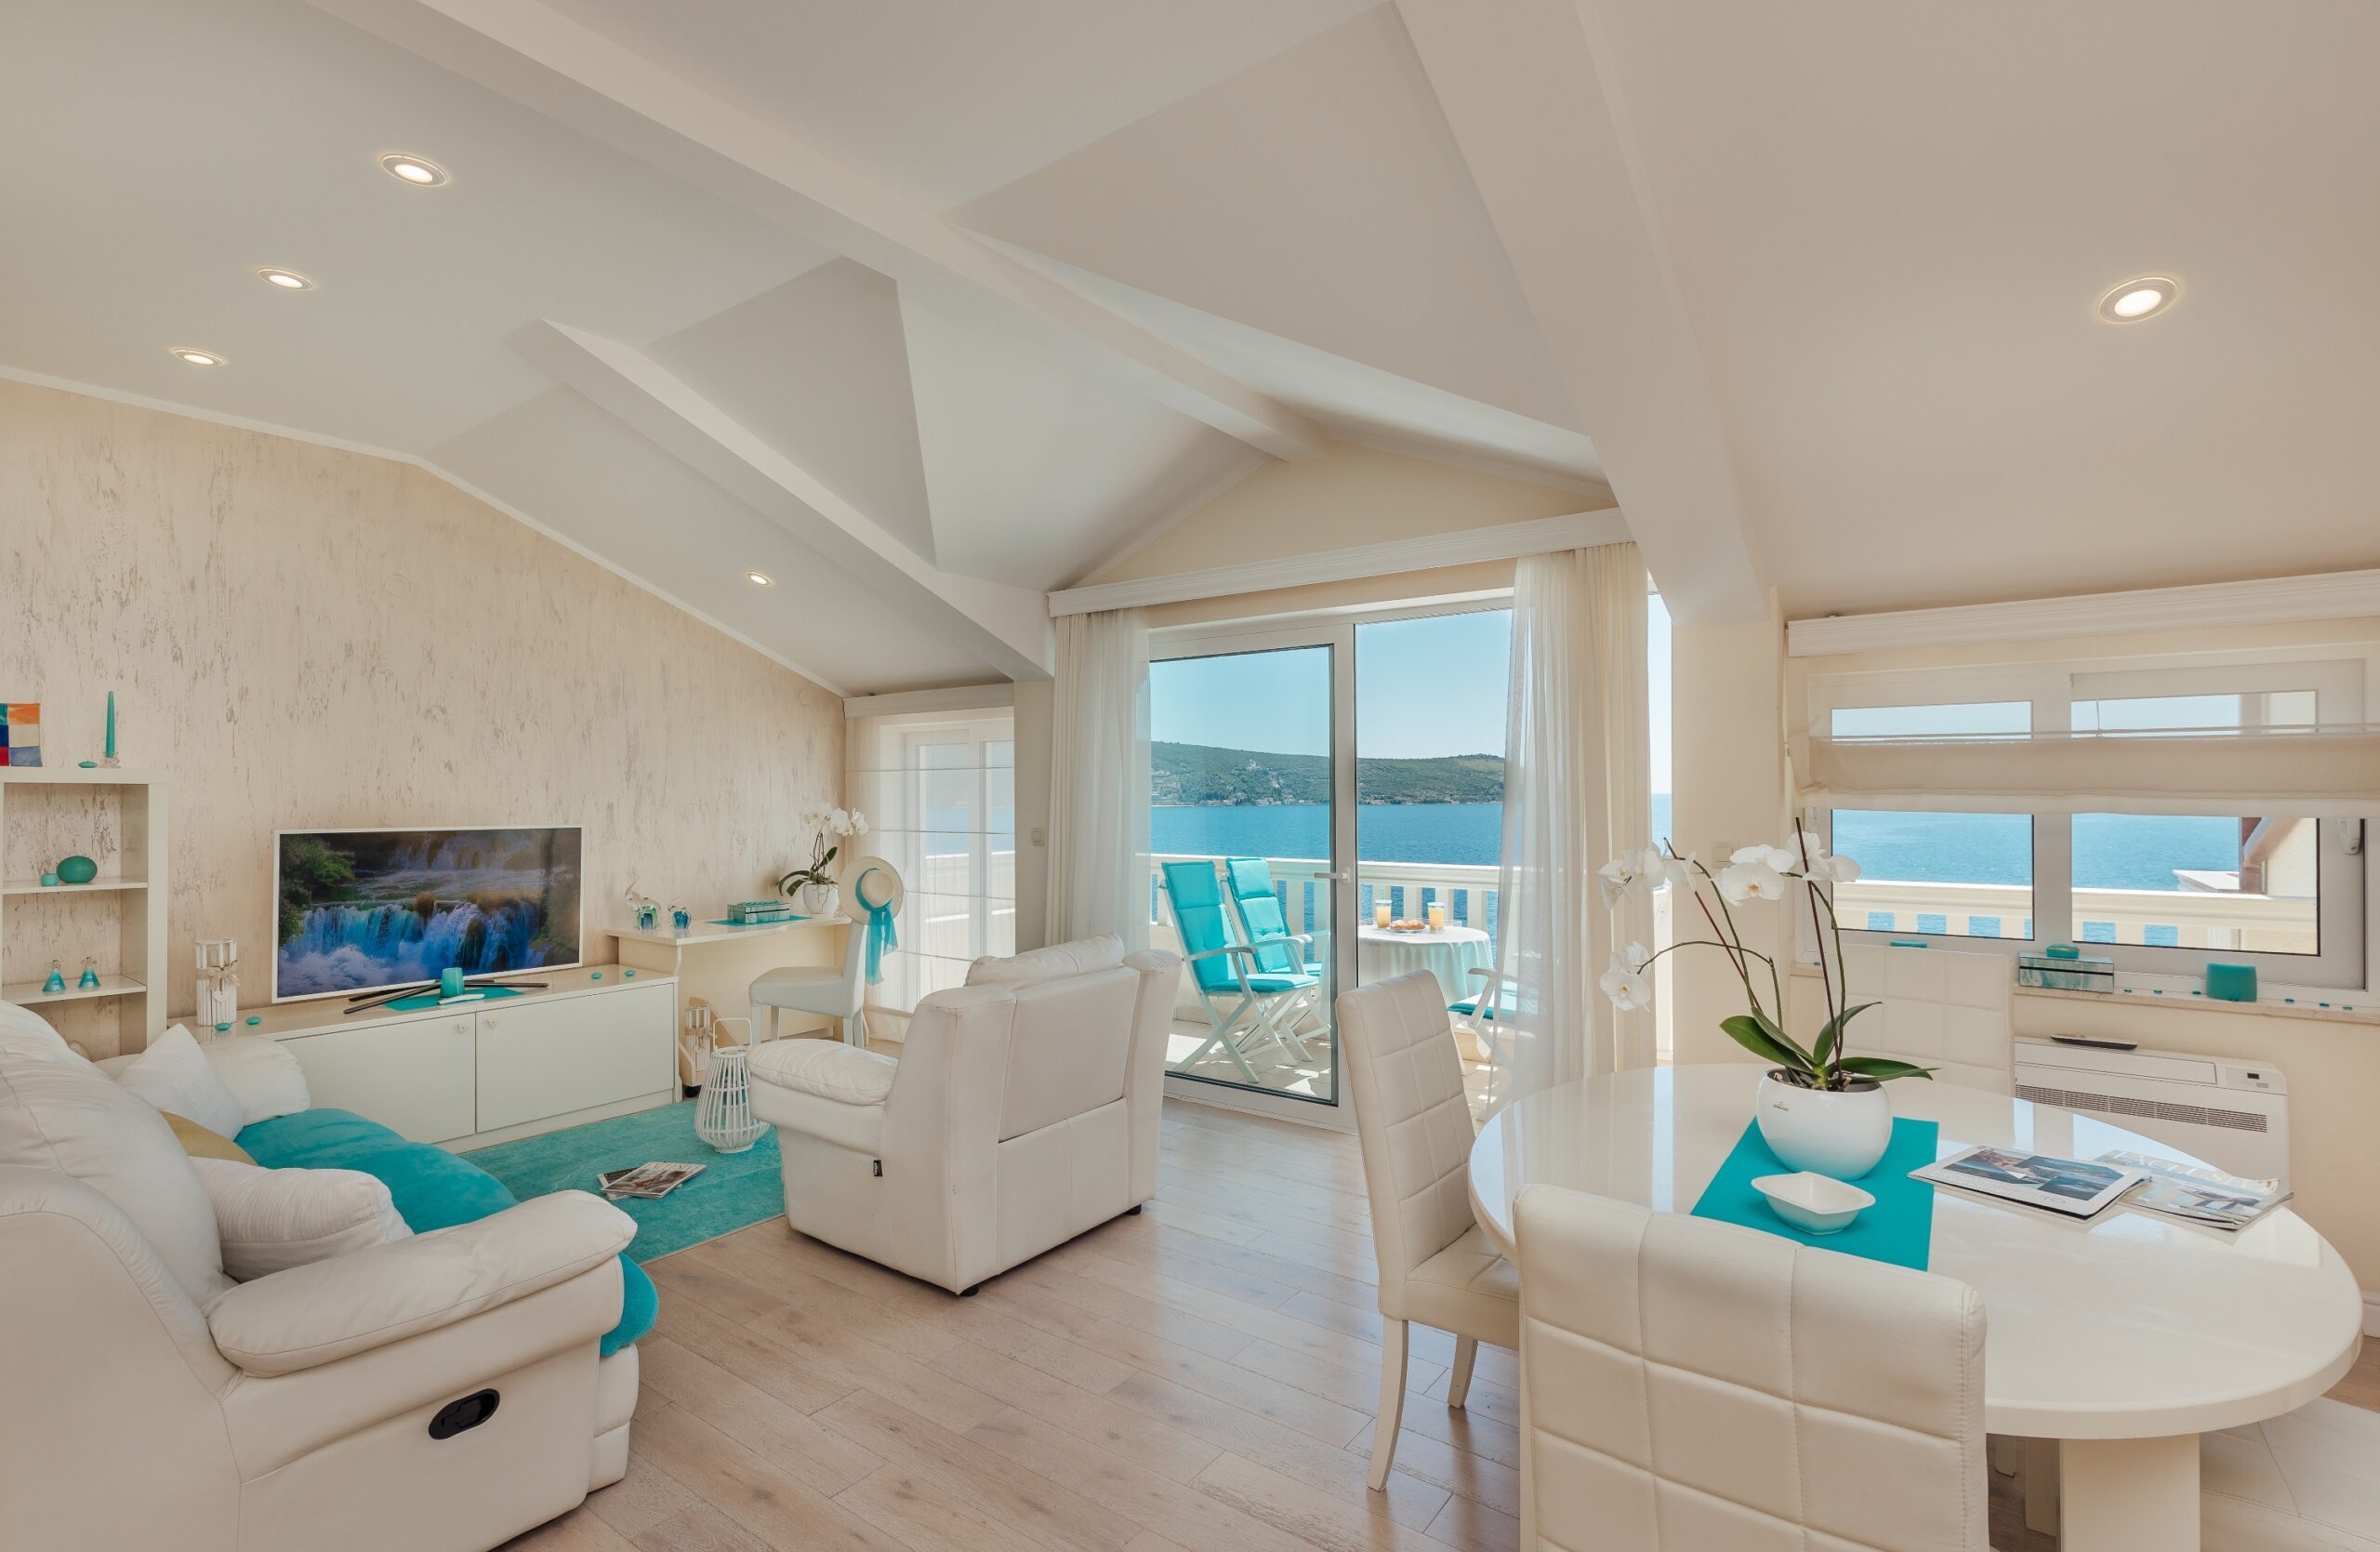 Living room and dining area with beautiful sea view